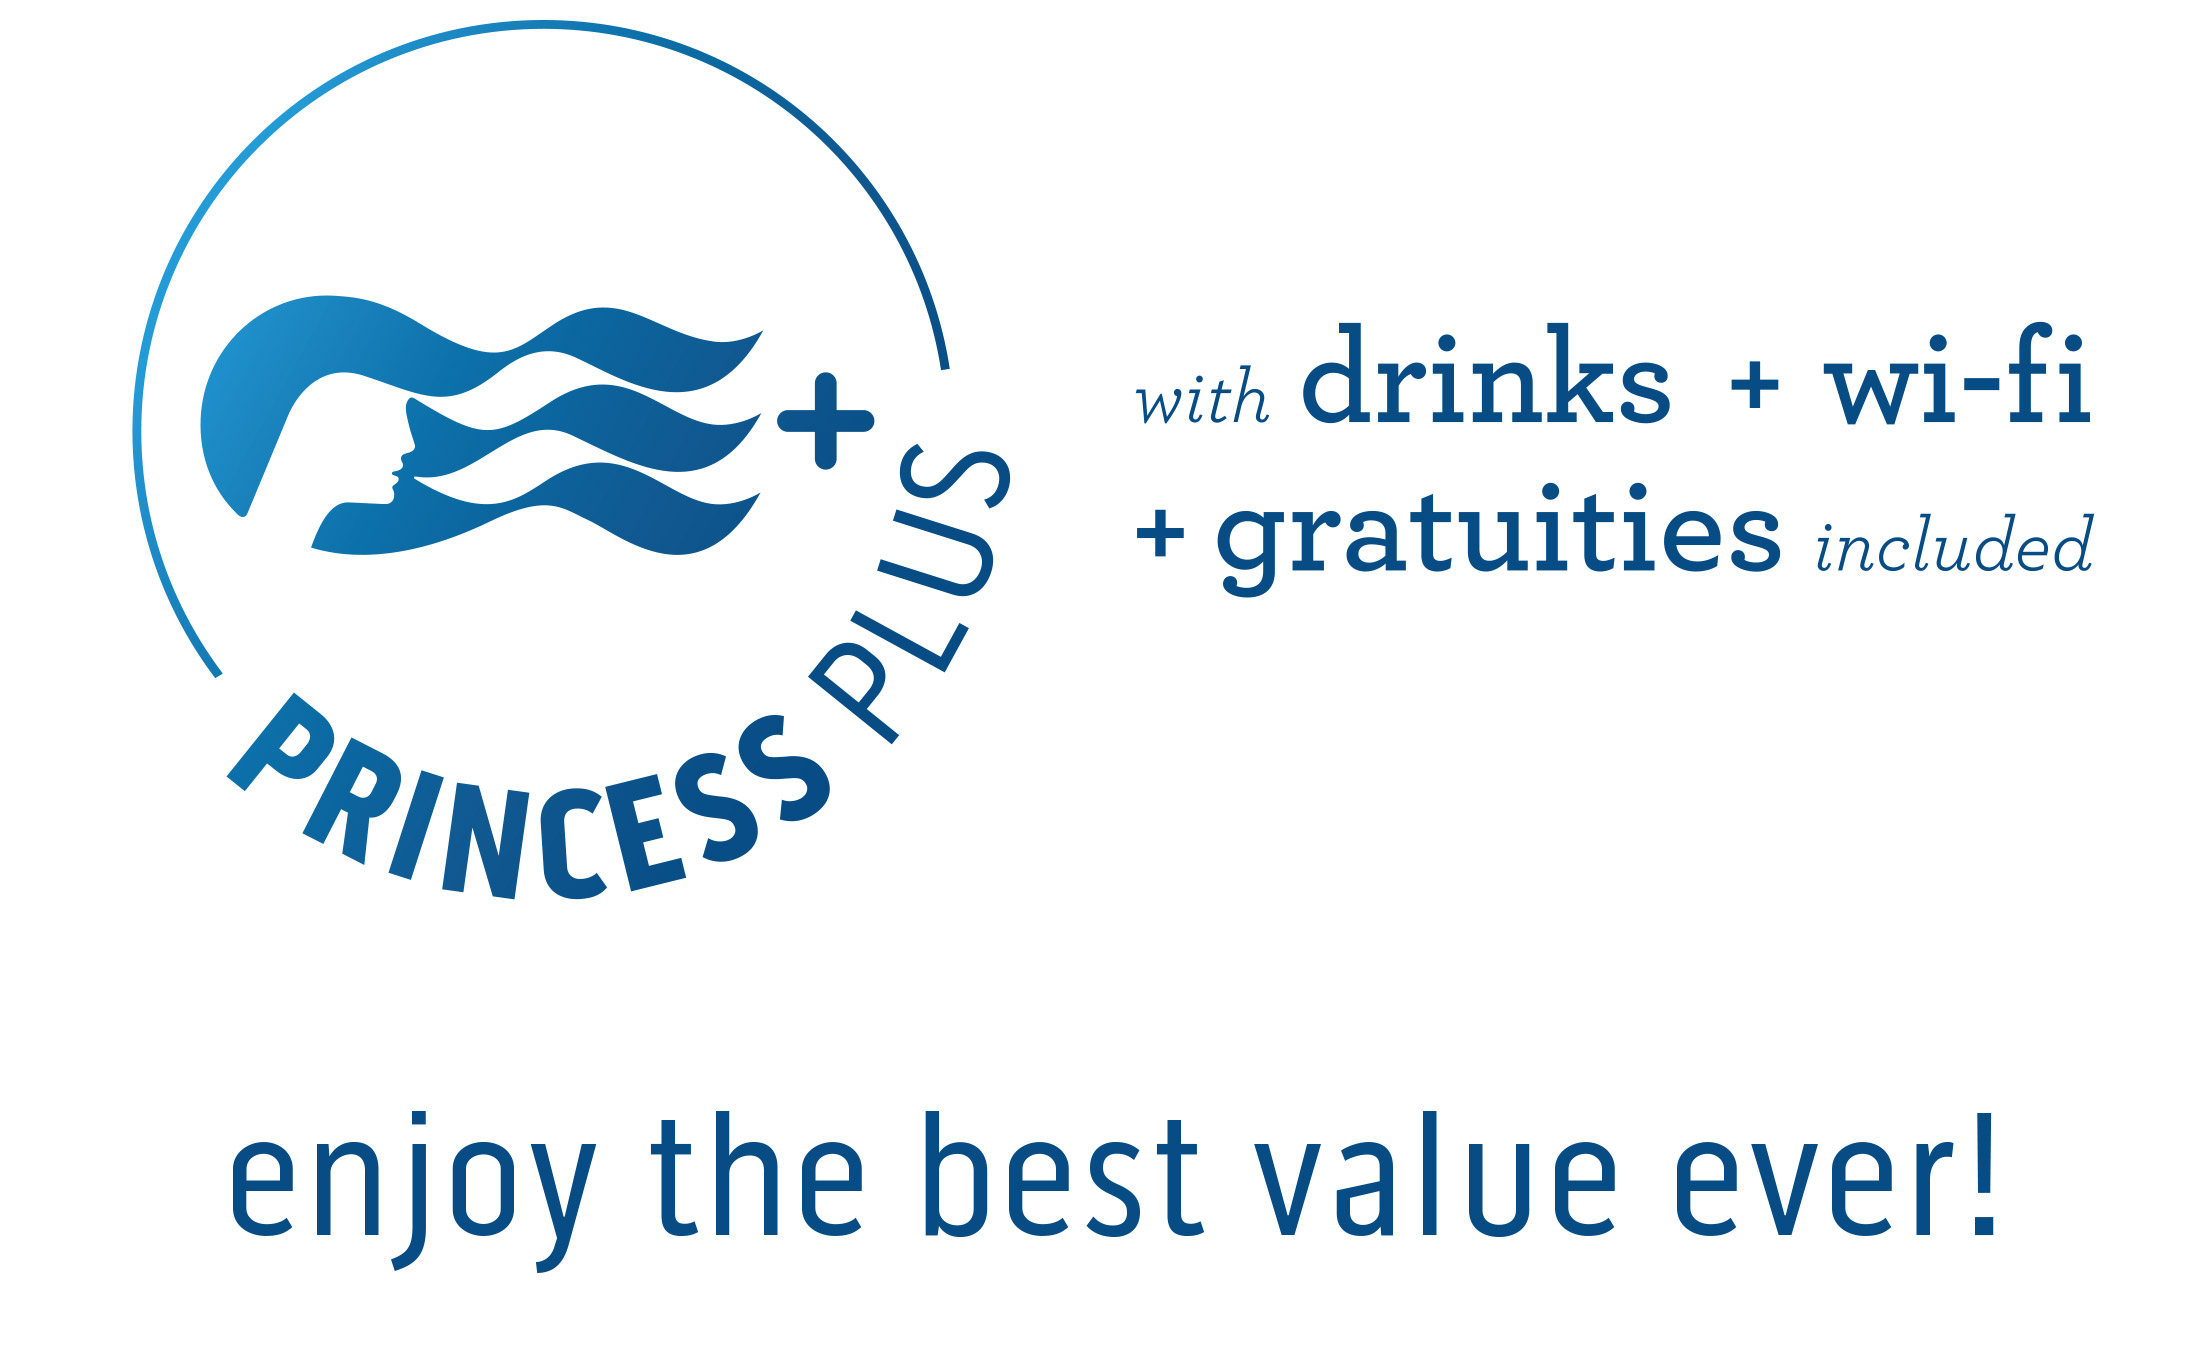 Princess Plus - Drinks + Wi-fi + Gratuities included. The Best Value Ever!